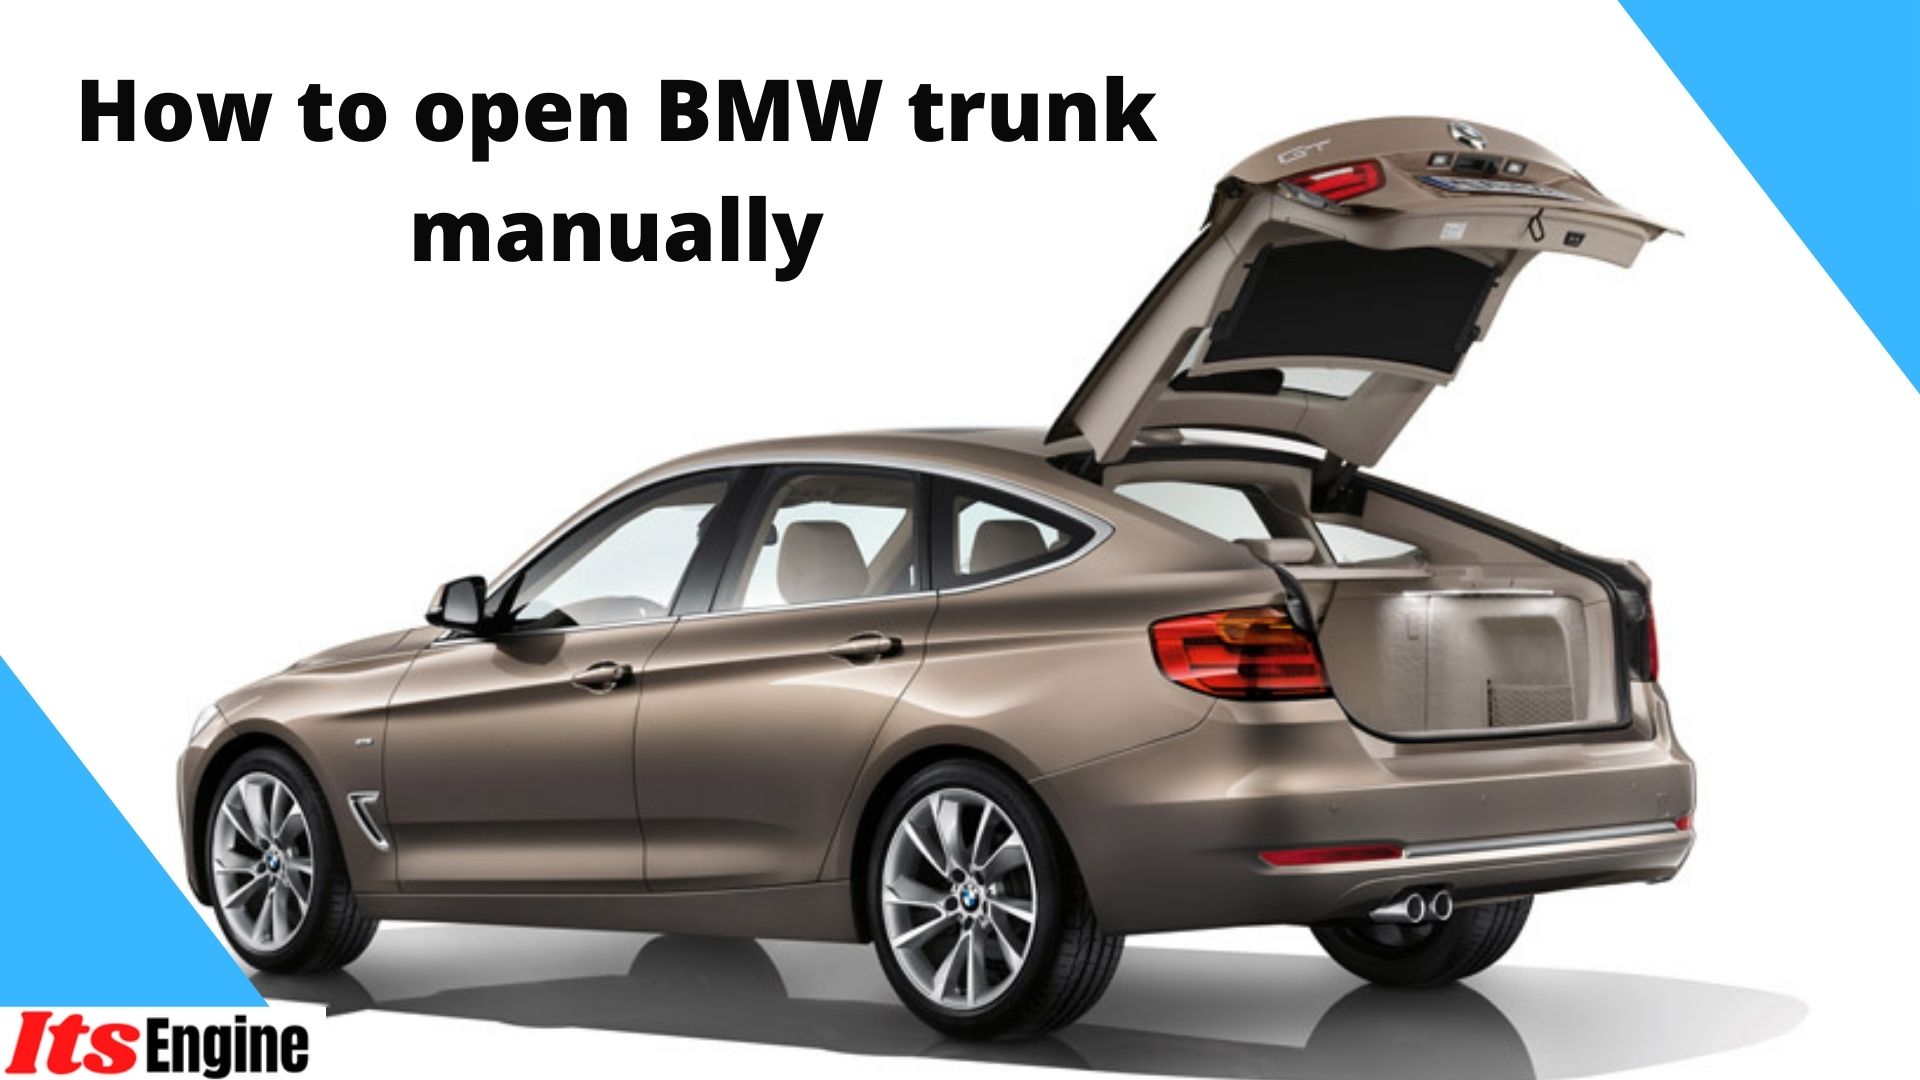 How to open BMW trunk manually